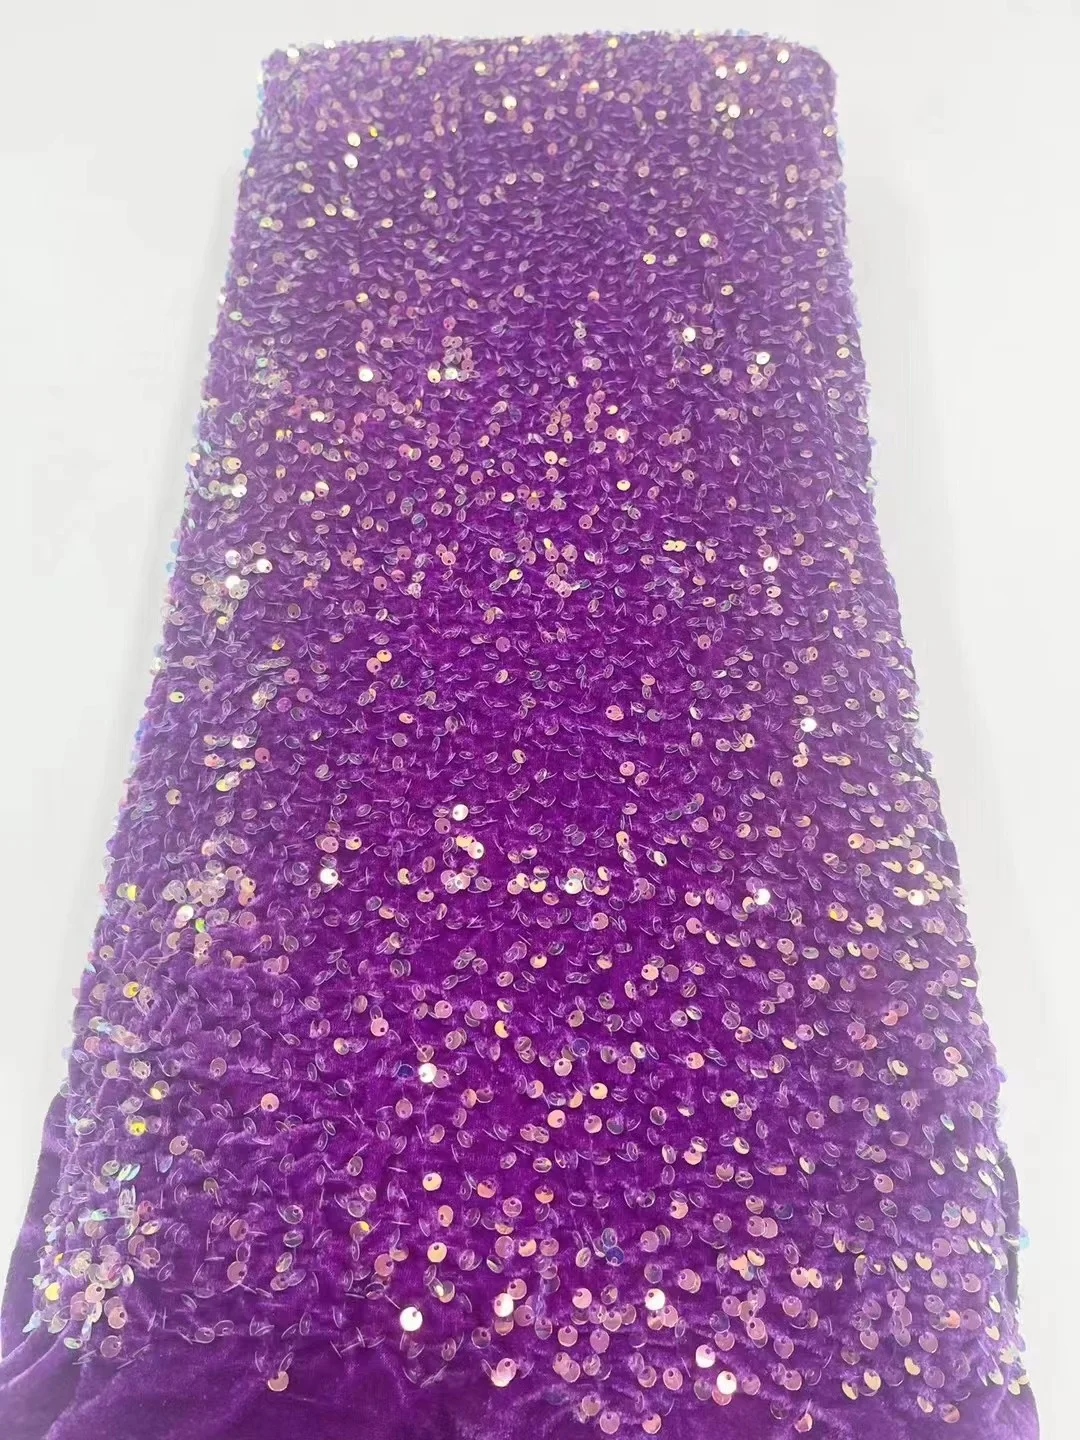 New Purple Velvet Sequence Lace Fabric 2023 African Swiss Voile Embroidery 3D Sequins Net Lace Fabric 5 Yards For Sewing